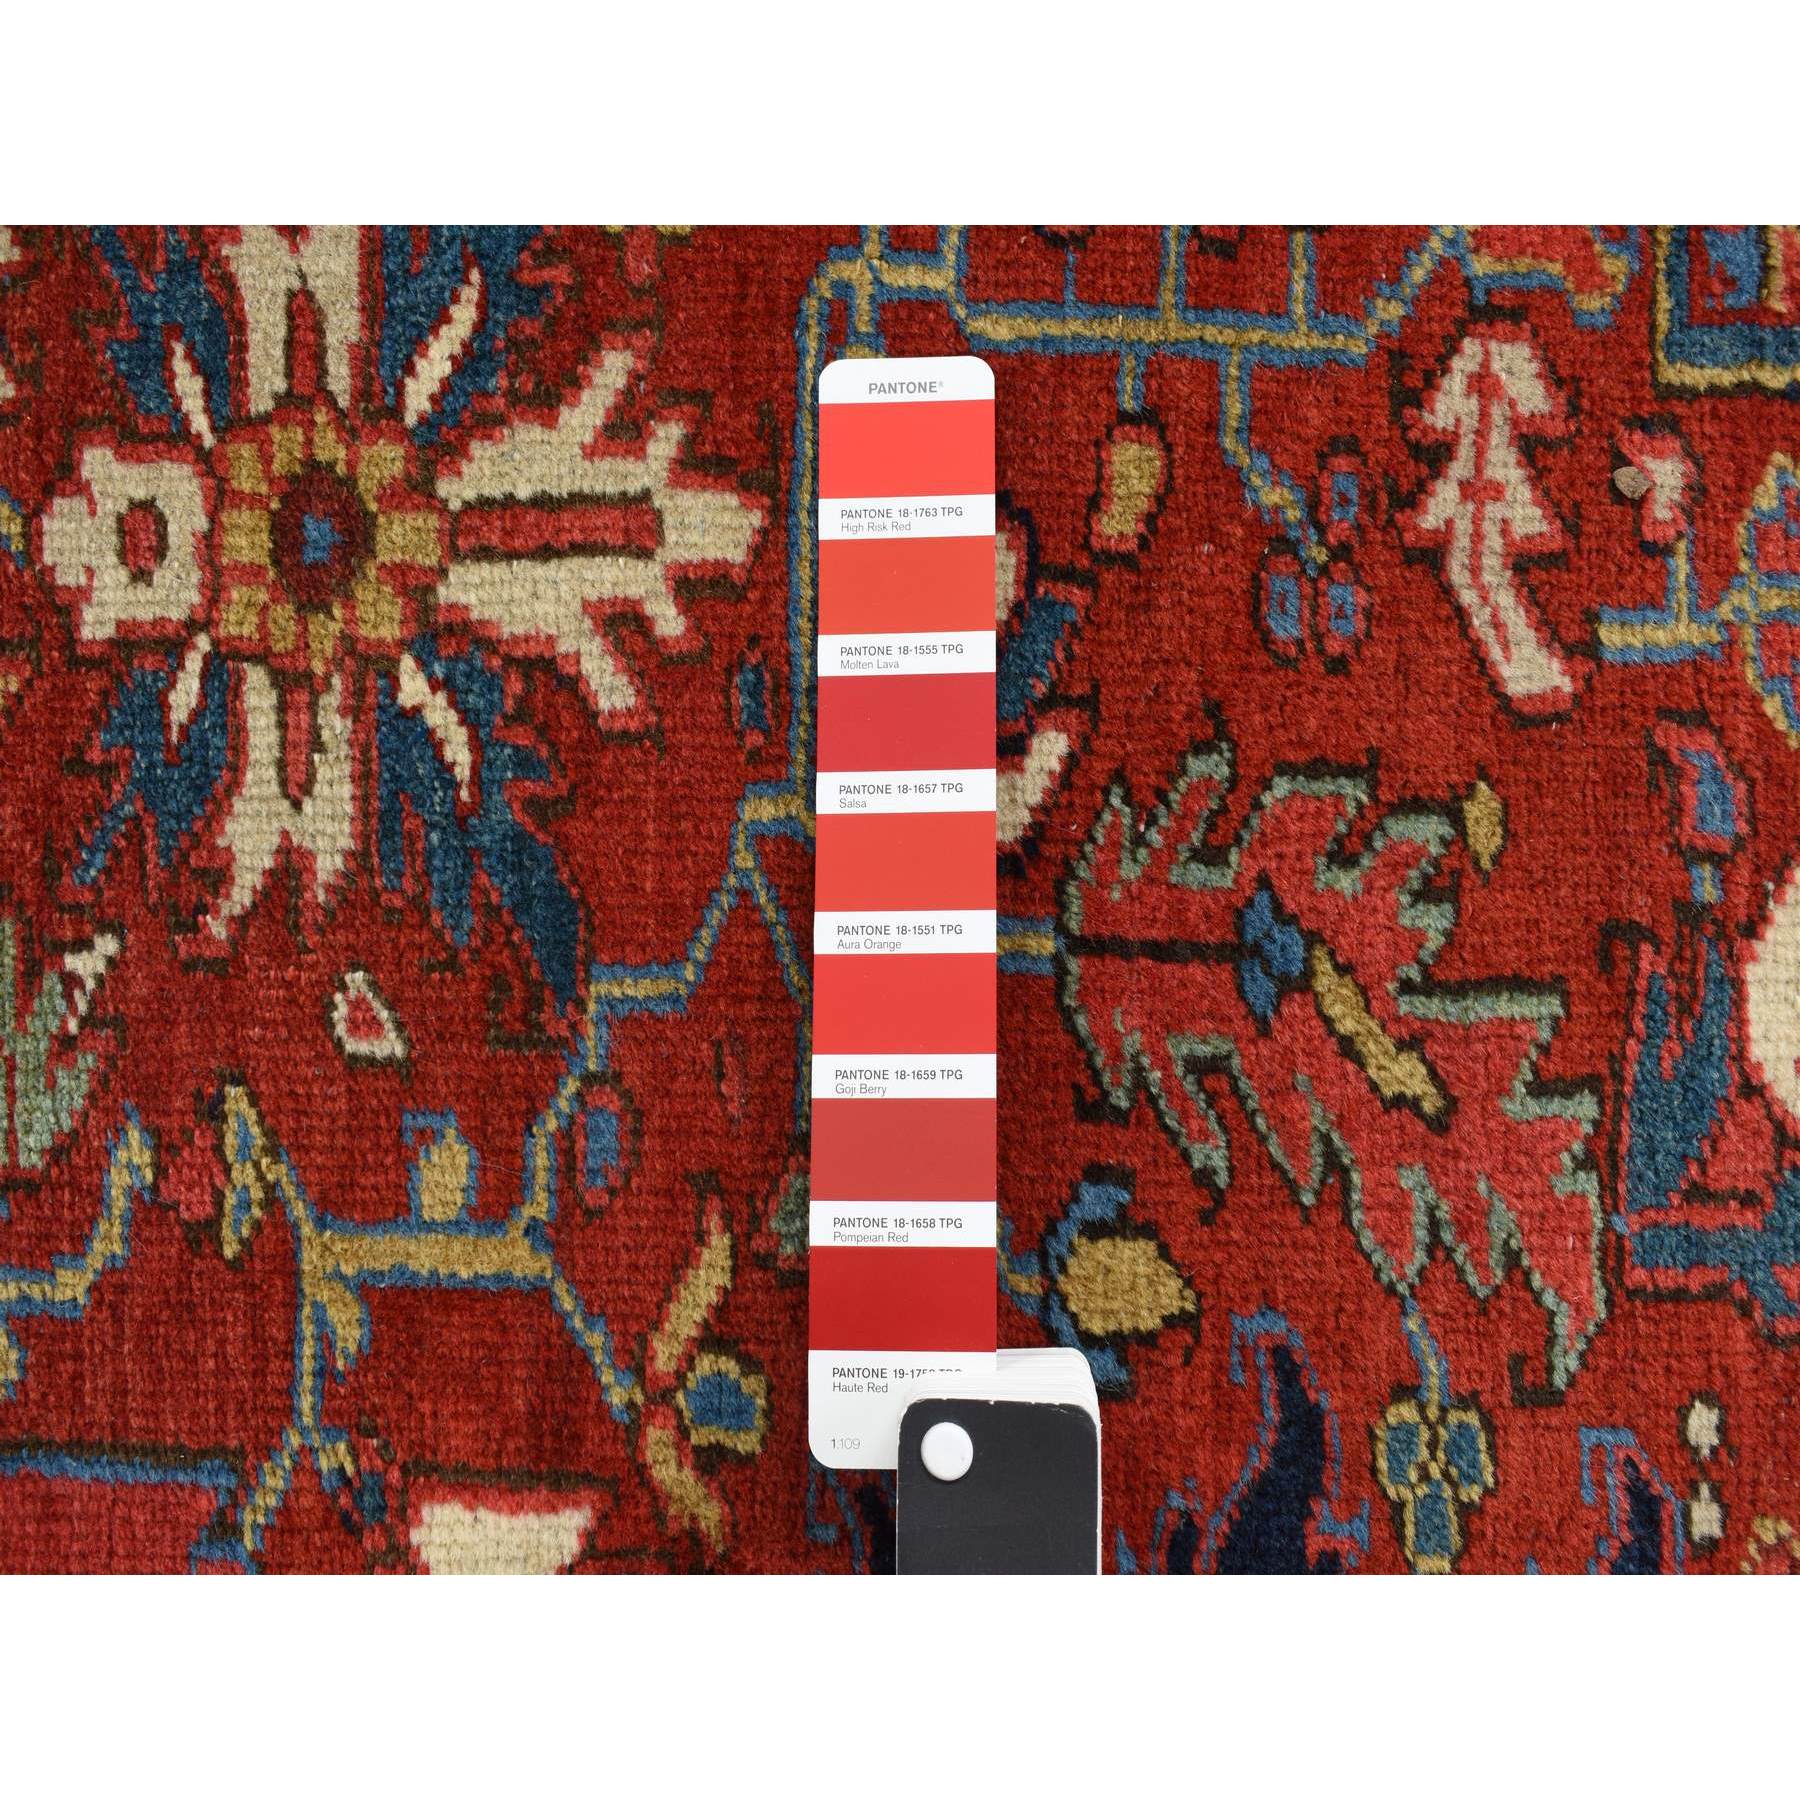  Wool Hand-Knotted Area Rug 8'7